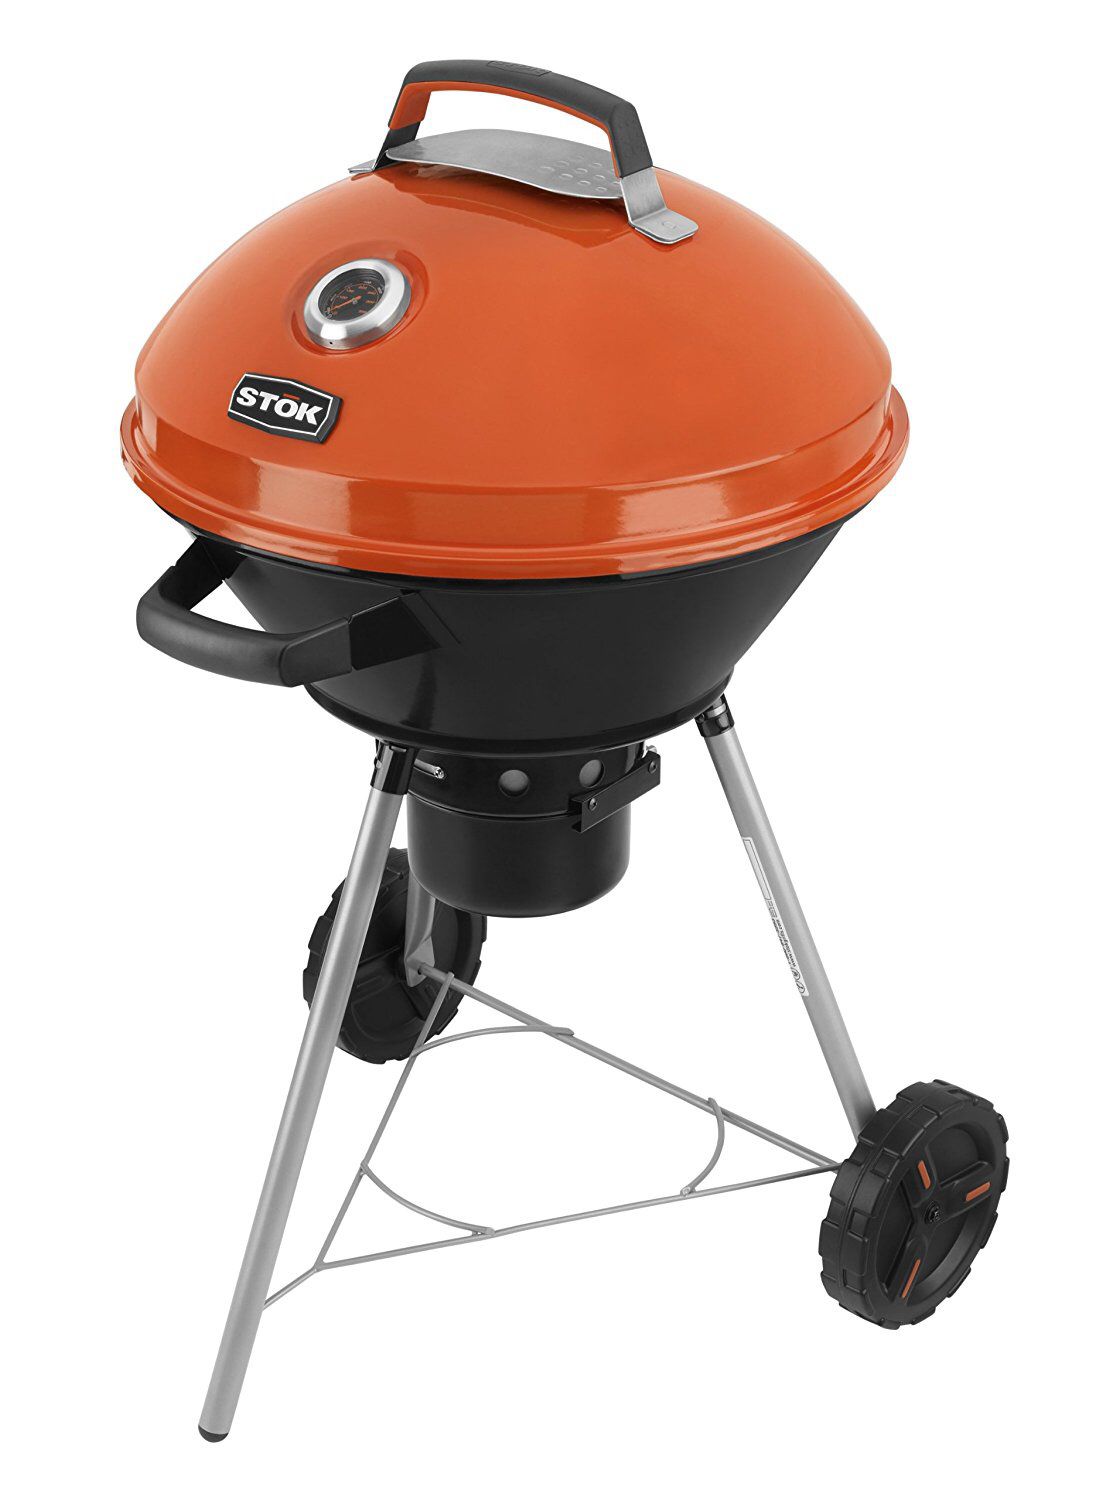 Stok drum charcoal grill